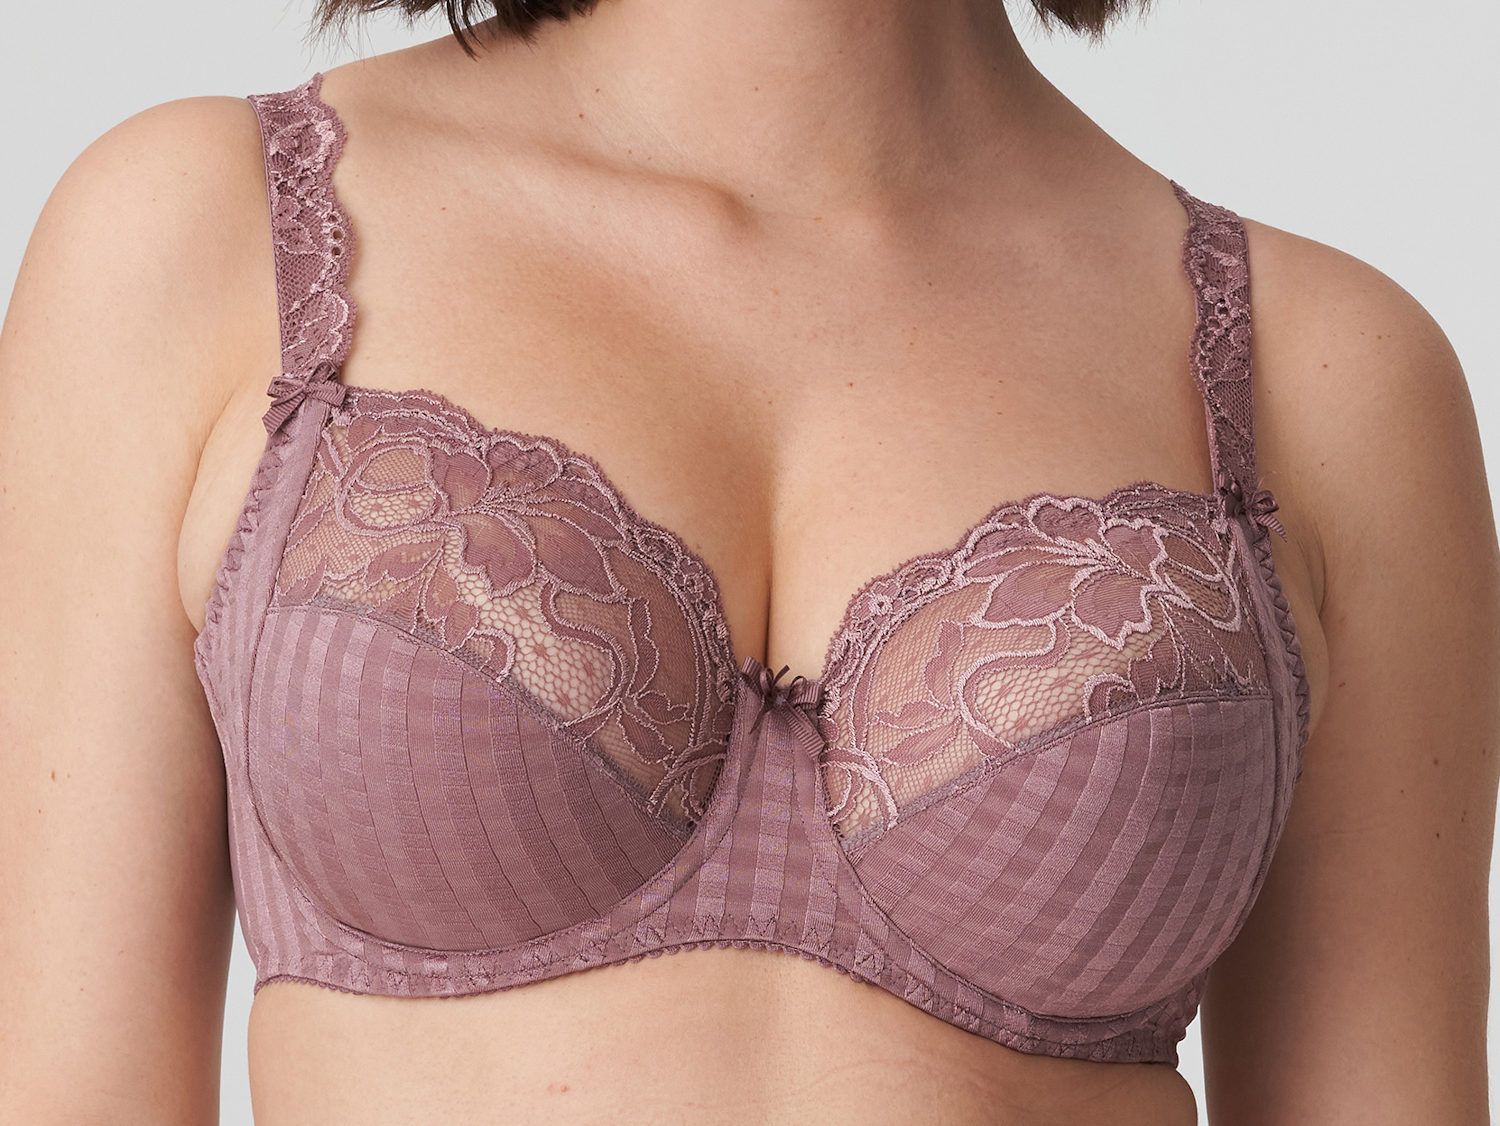 Prima Donna Madison Non-Padded Full Cup Seamless Bra in Black